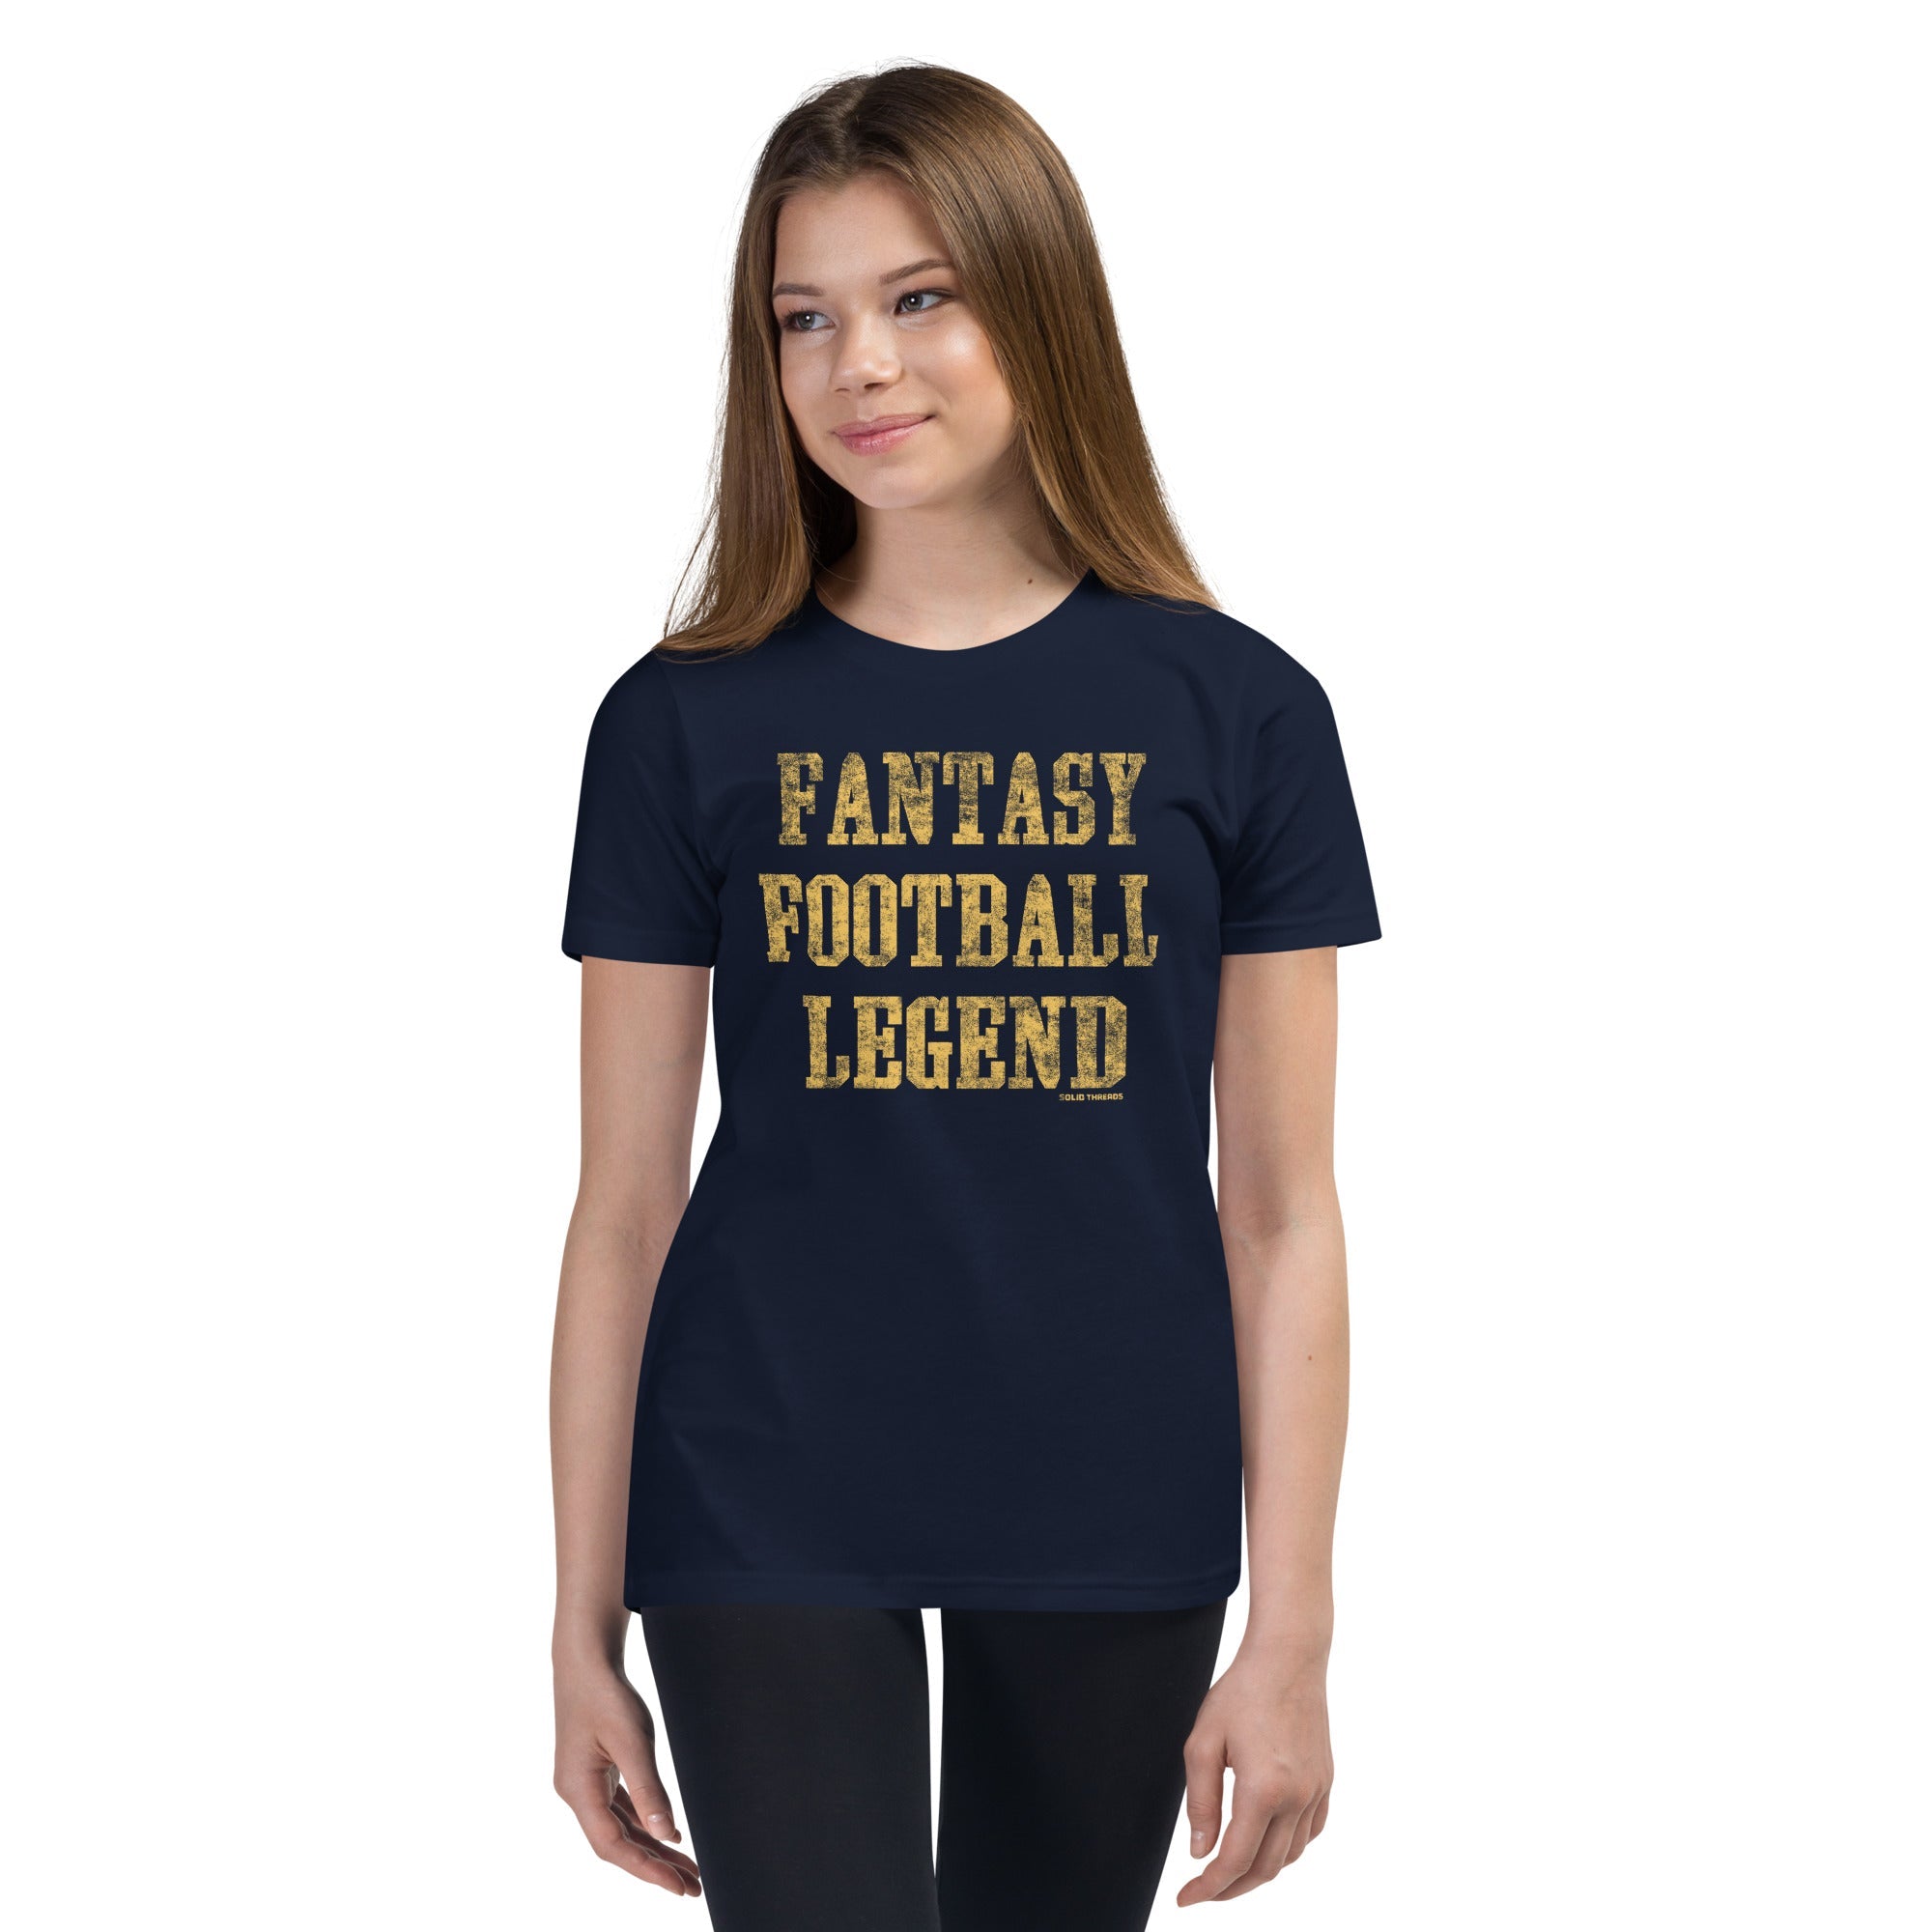 Youth Fantasy Football Legend Extra Soft T-Shirt | Funny Sports Kids Tee Girl Model | Solid Threads